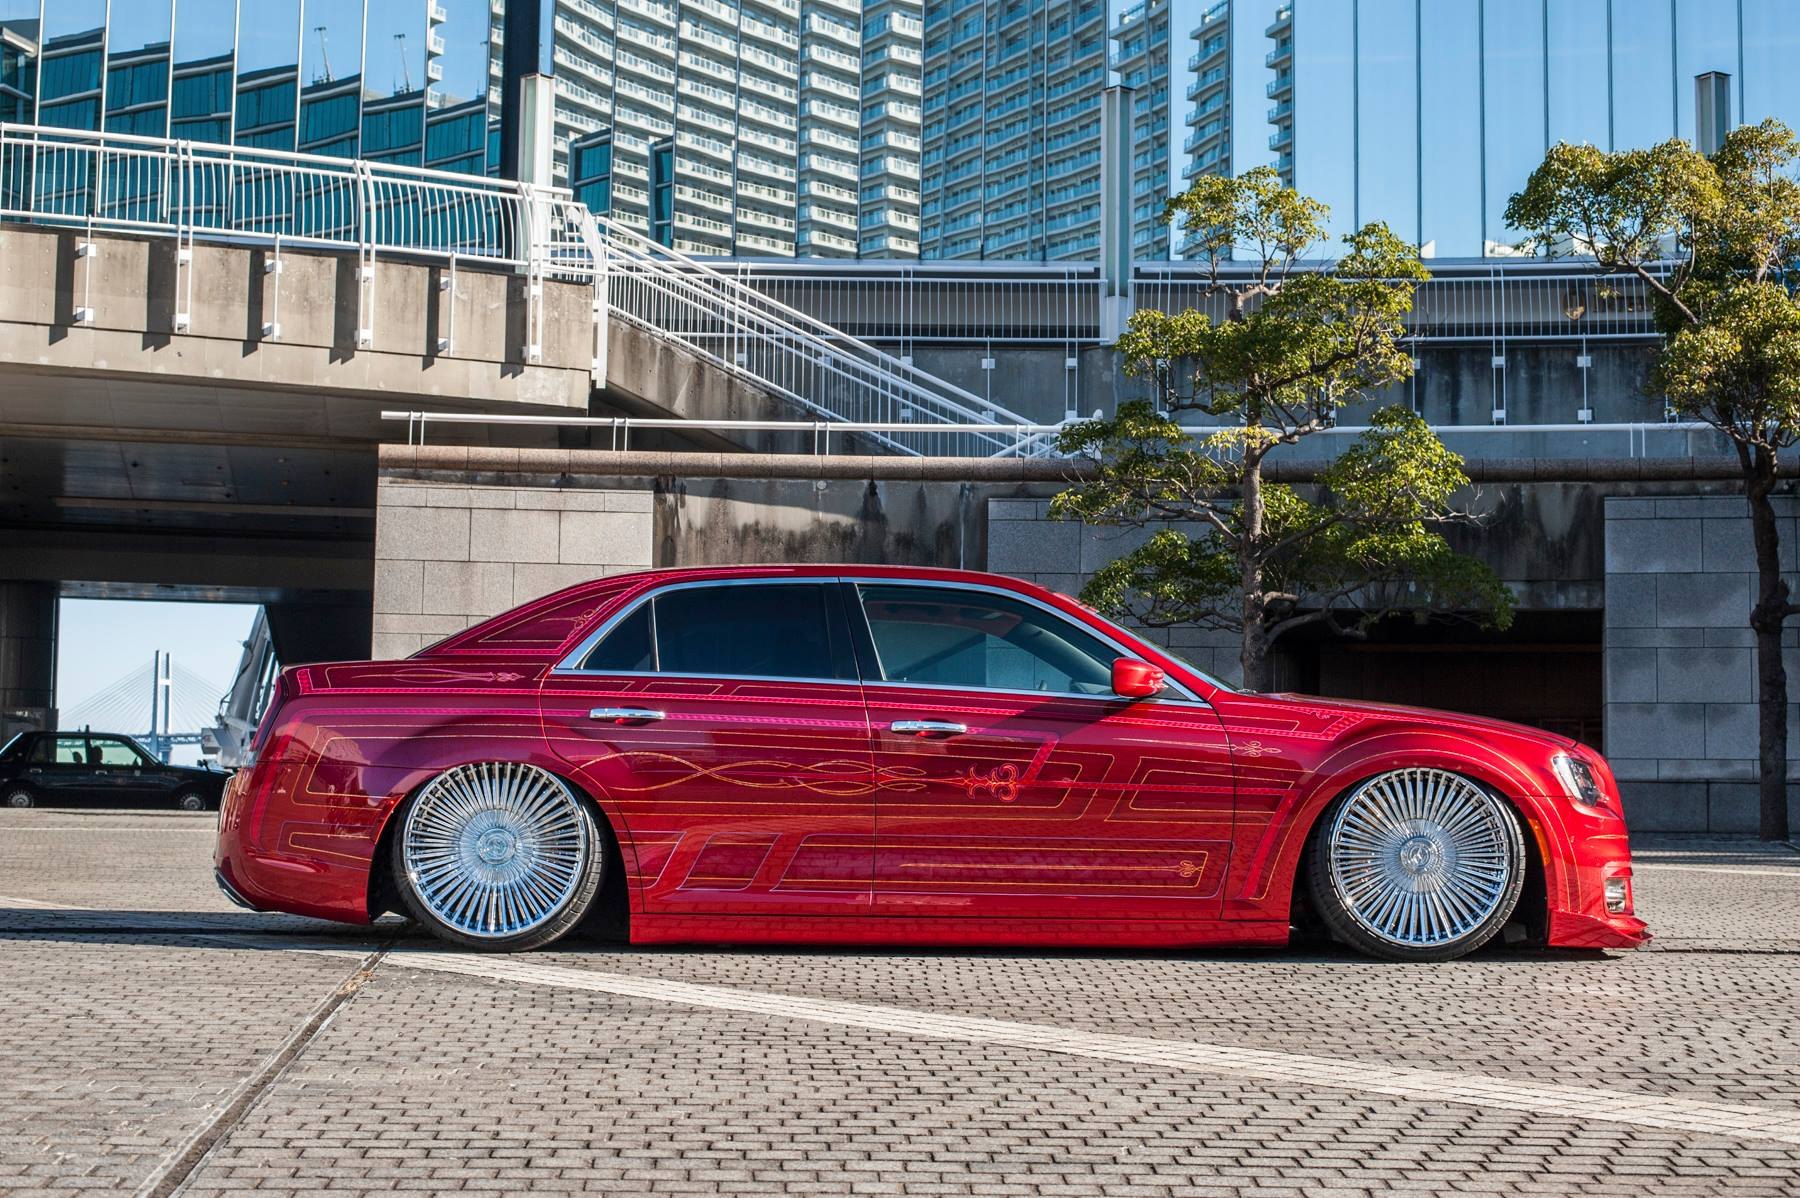 Aftermarket Side Skirts on Red Lowered Chrysler 300 - Photo by Lexani